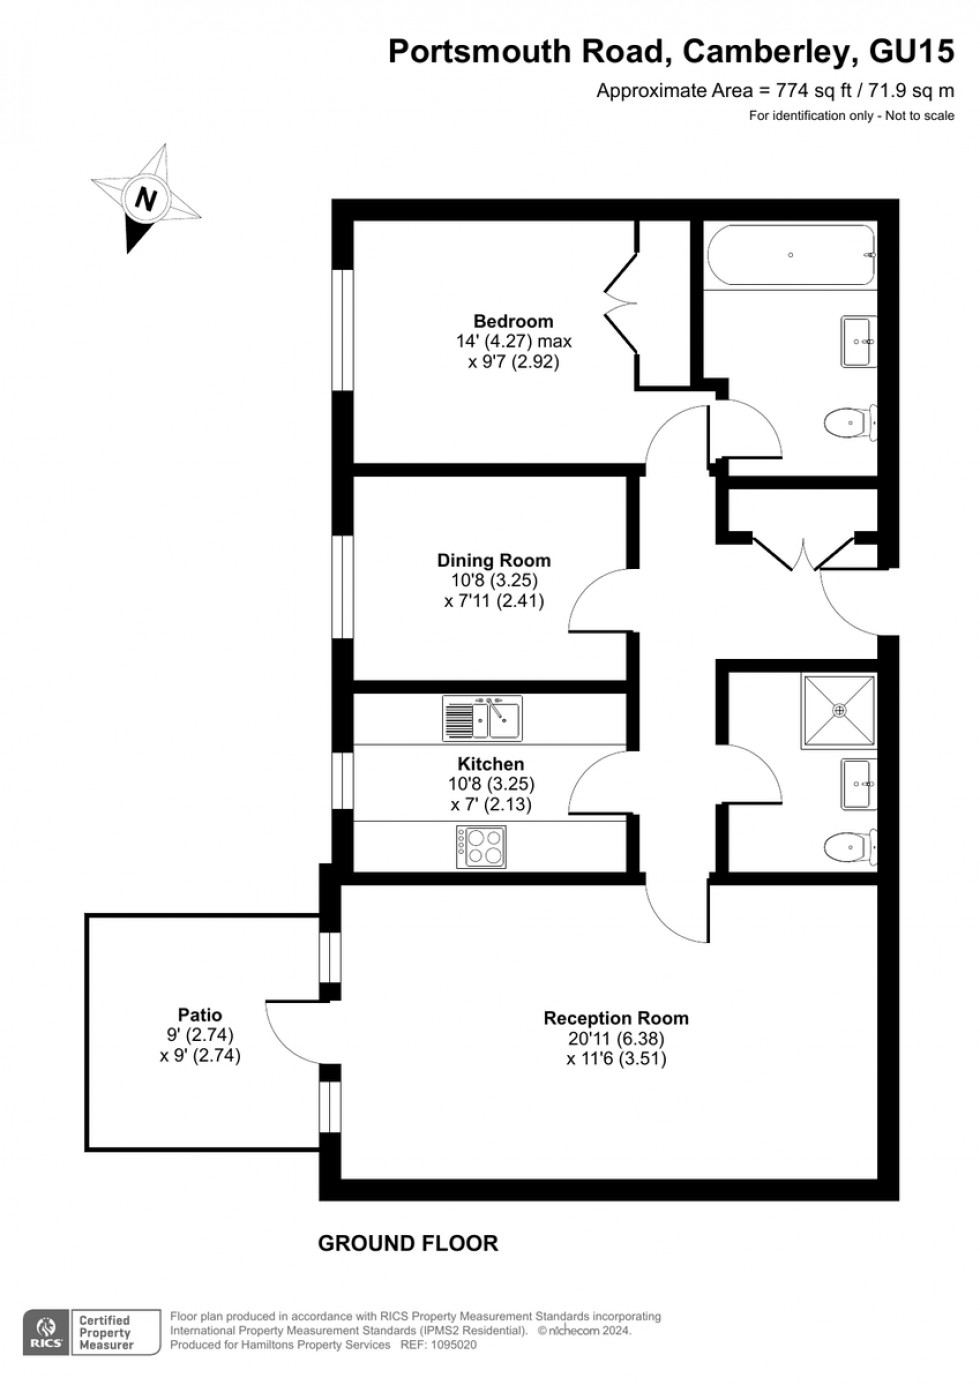 Floorplan for Portsmouth Road, Camberley